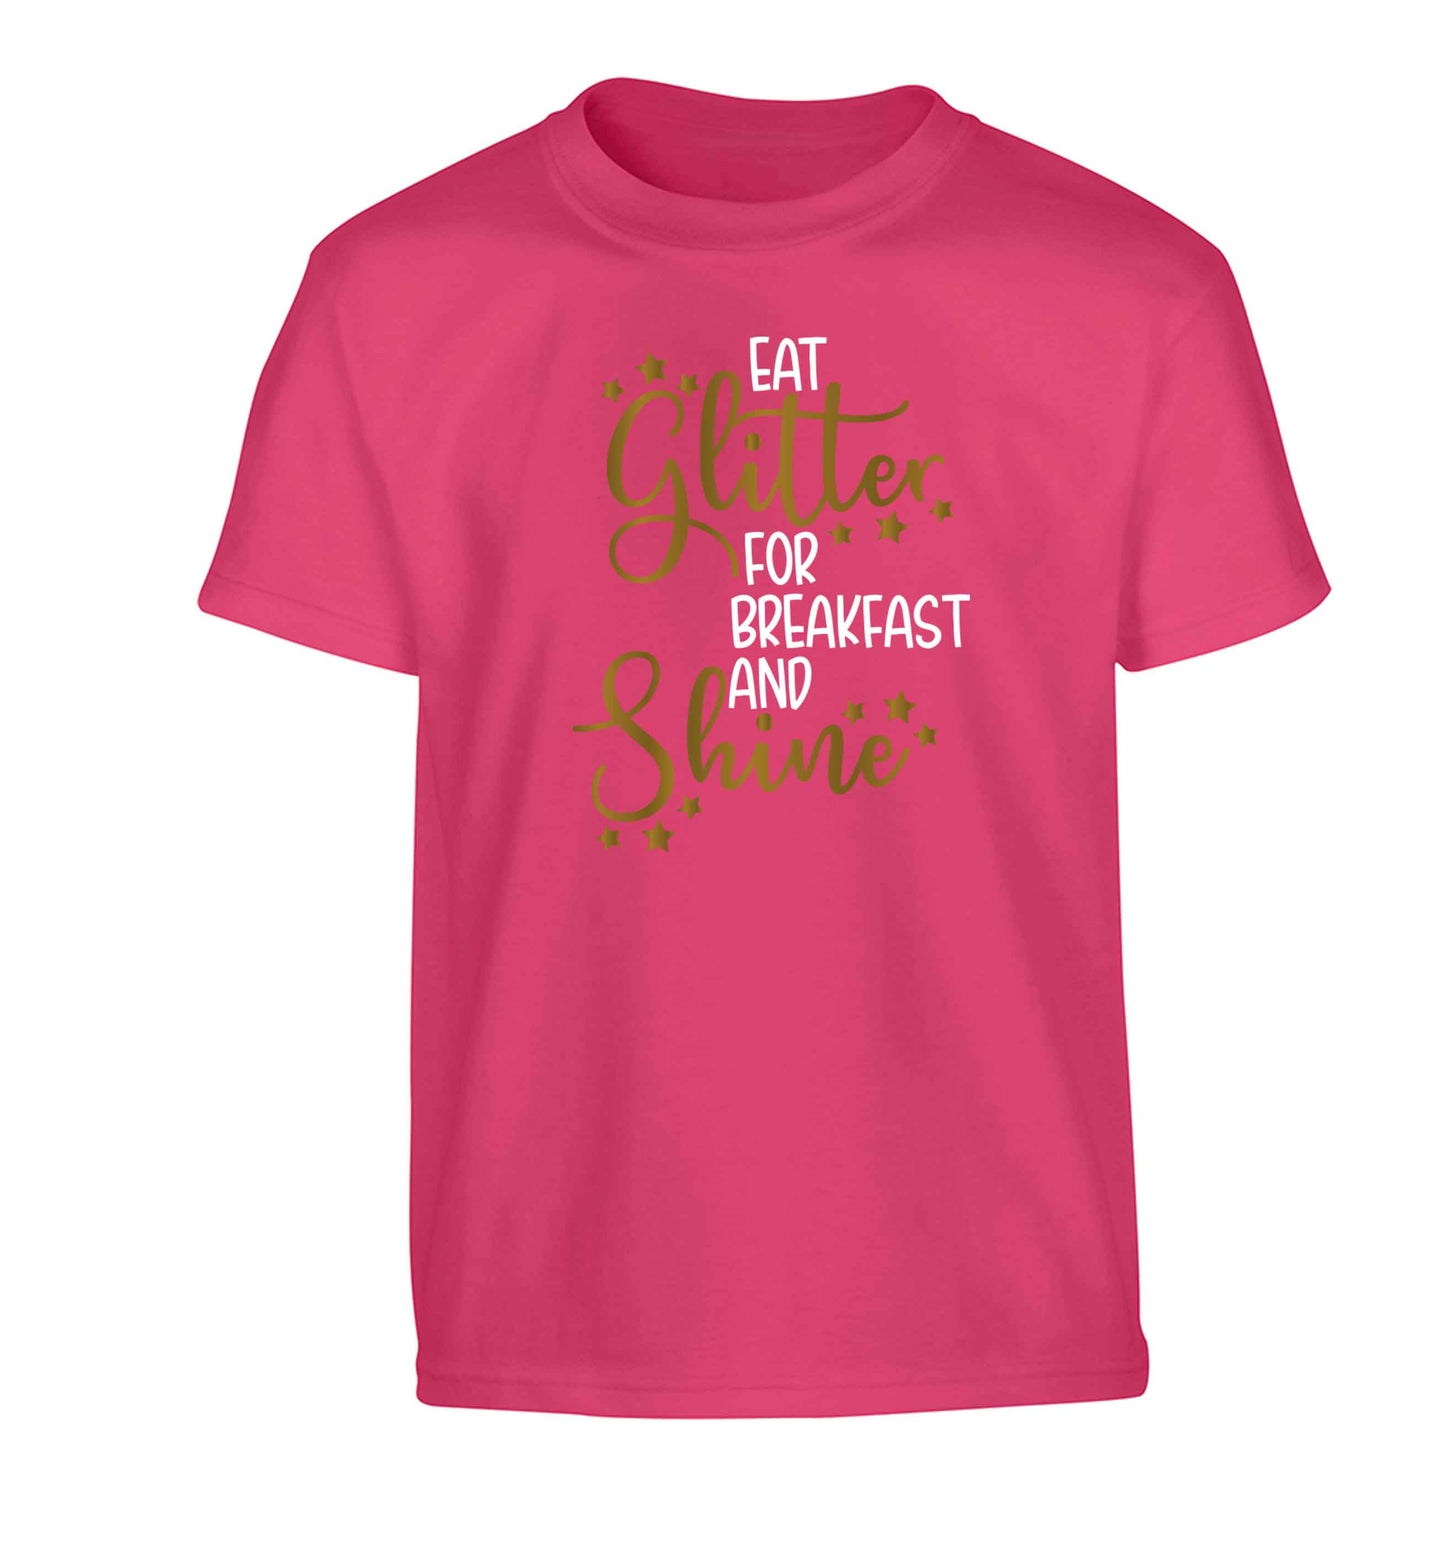 Eat glitter for breakfast and shine all day Children's pink Tshirt 12-13 Years